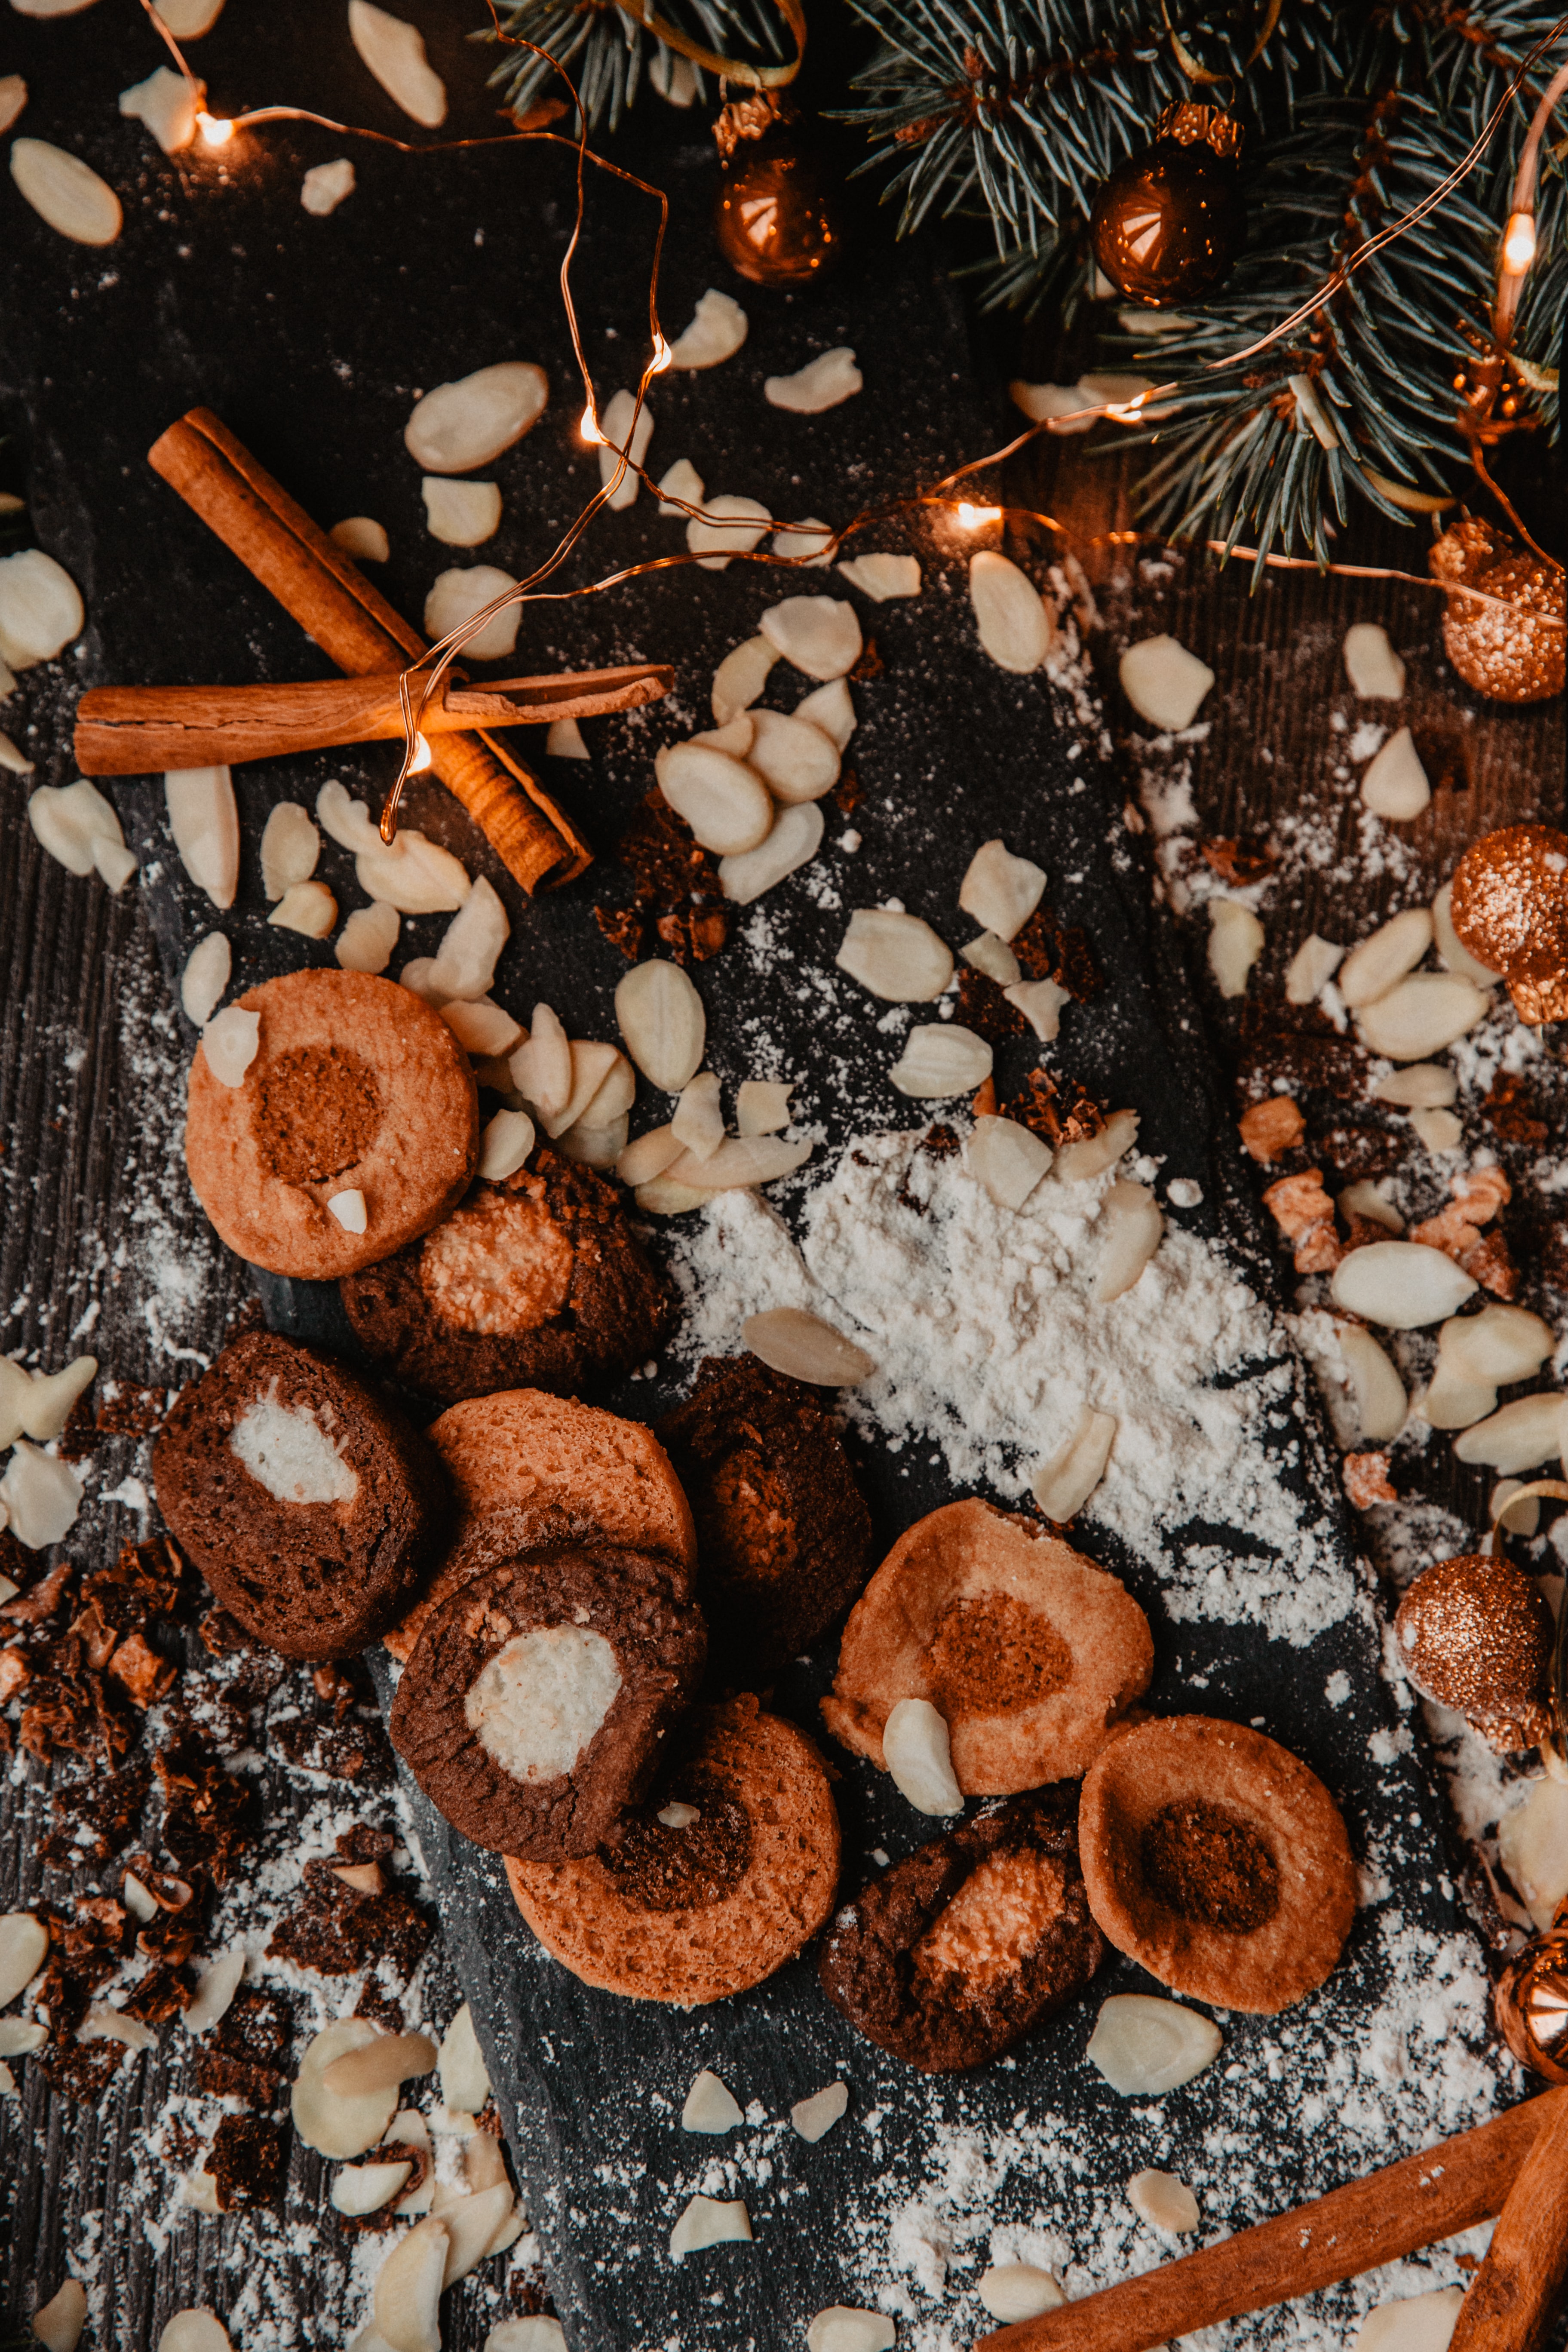 105008 download wallpaper food, new year, cookies, christmas, garland, spice, spices screensavers and pictures for free